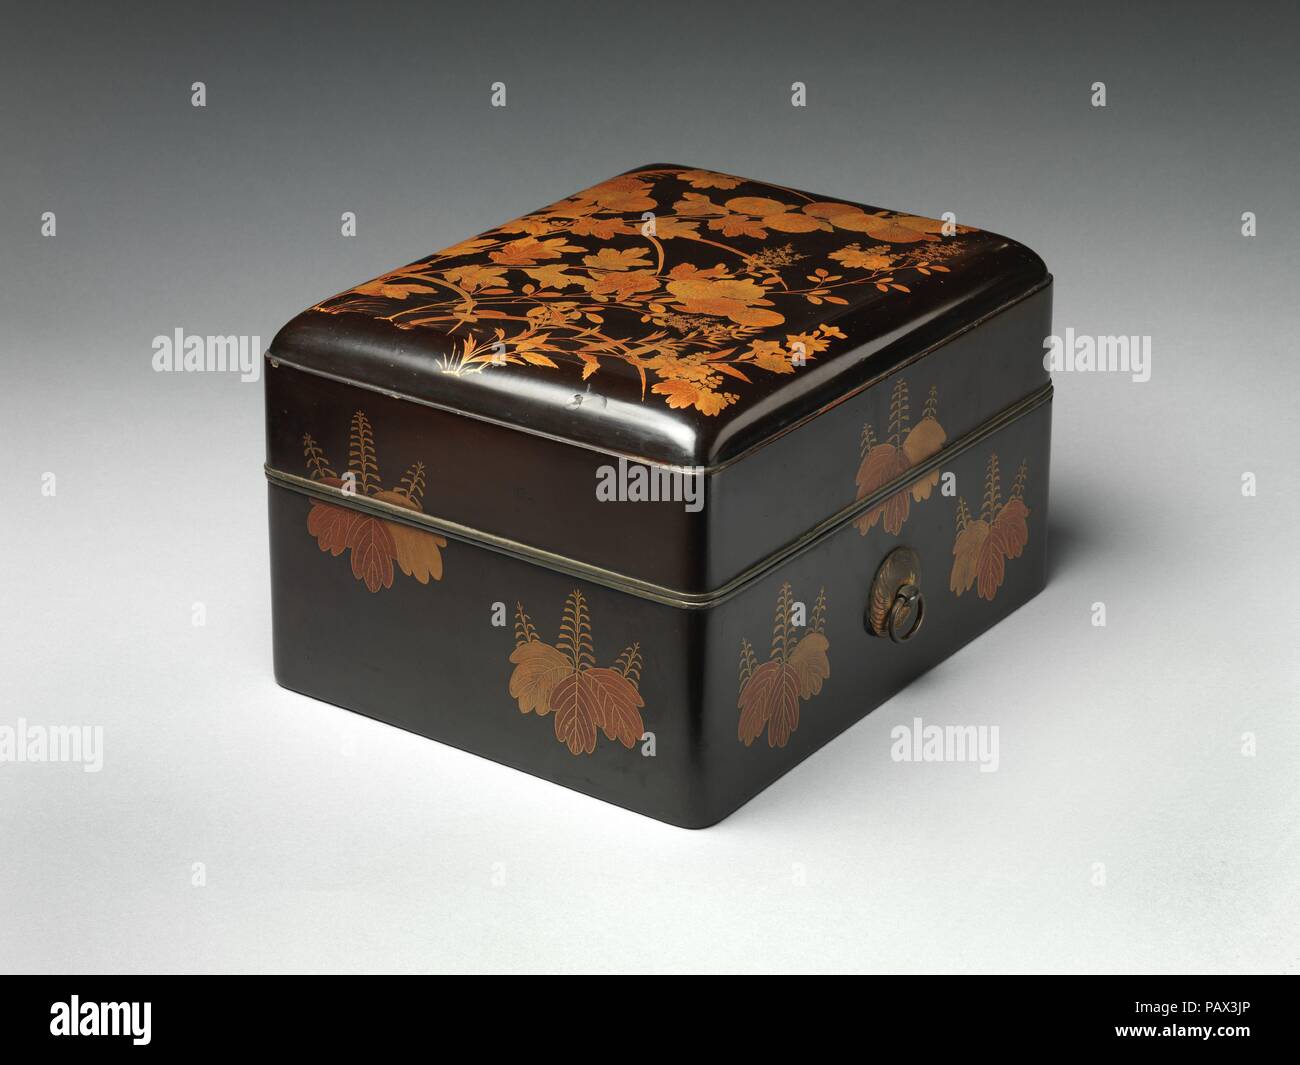 Box for Personal Accessories with Autumn Grasses. Culture: Japan. Dimensions: H. 8 7/8 in. (22.5 cm); W. 8 13/16 in. (22.4 cm); L. 11 1/8 in. (28.3 cm)  Storage Box: 11 x 12 1/4 x 14 1/4 in. (27.9 x 31.1 x 36.2 cm). Date: ca. 1600.  Autumn flowers and grasses, principally chrysanthemums, pampas grass, and bush clover, embellish the lid of this box. Scattered across the naturalistic depiction of these plants are five stylized paulownia crests that echo the larger ones adorning the sides. The combination of such crests with freely rendered autumn grasses is characteristic of lacquers associated  Stock Photo